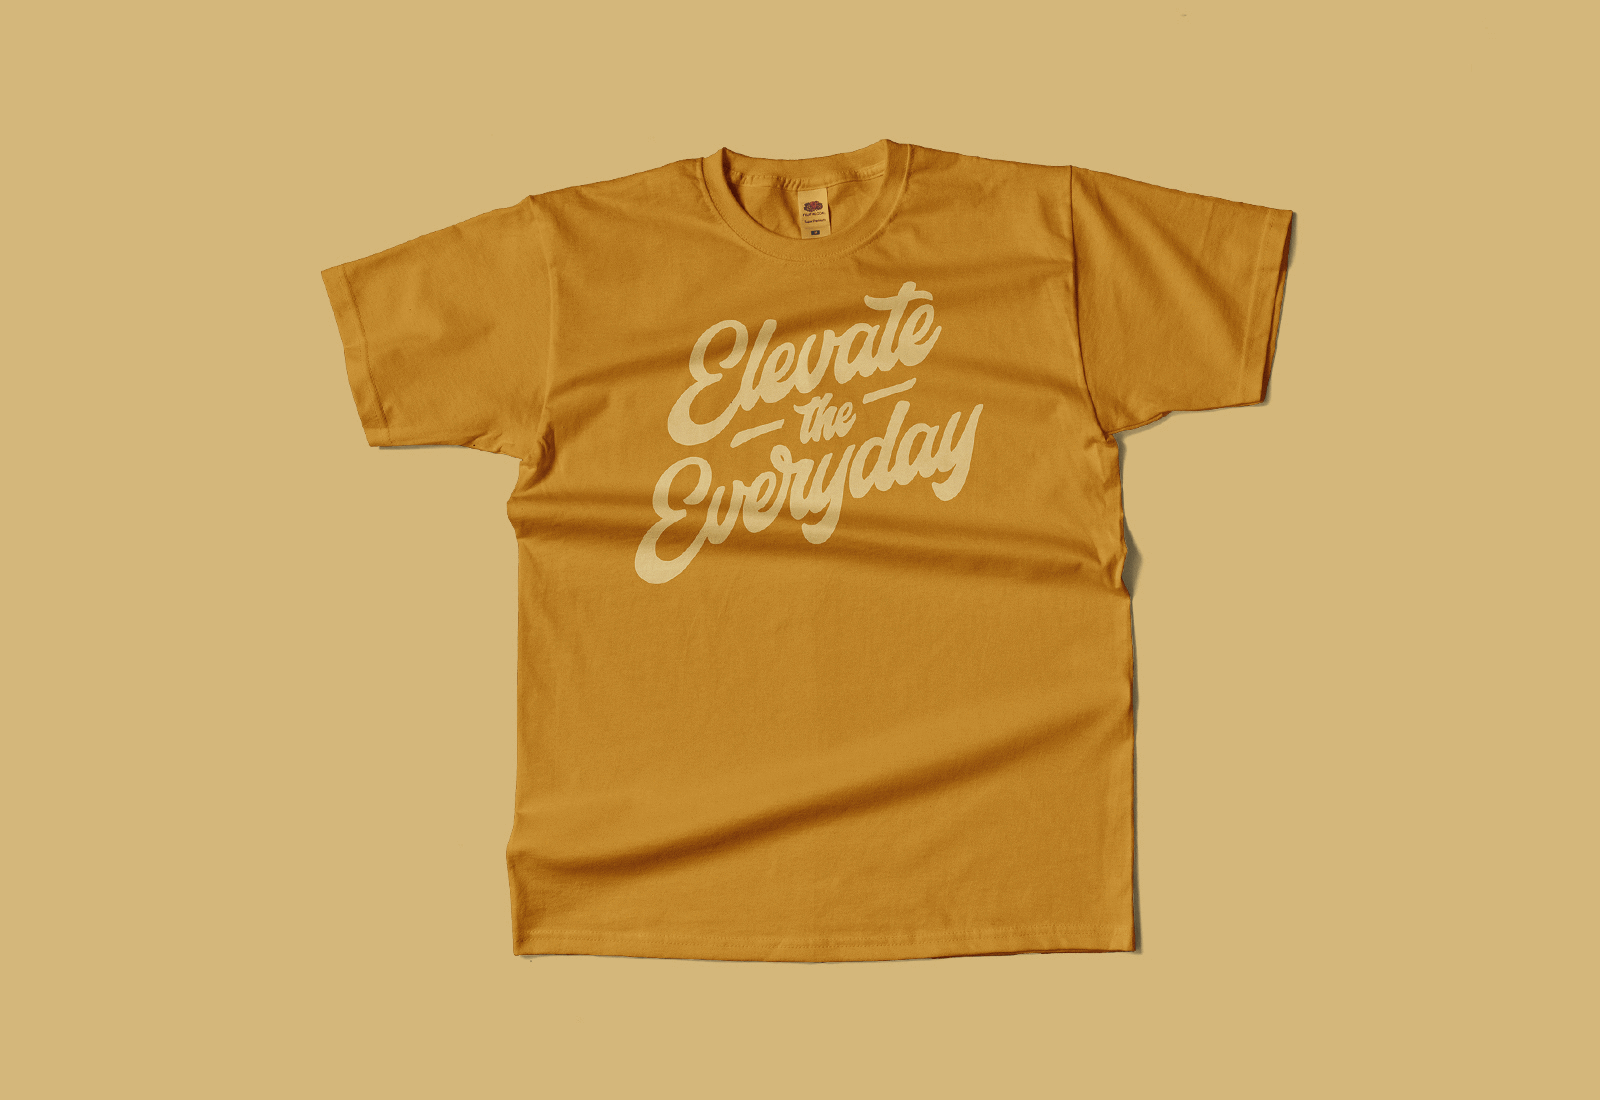 Elevate the Everyday Tees custom t shirt elevate hand lettering t shirt design